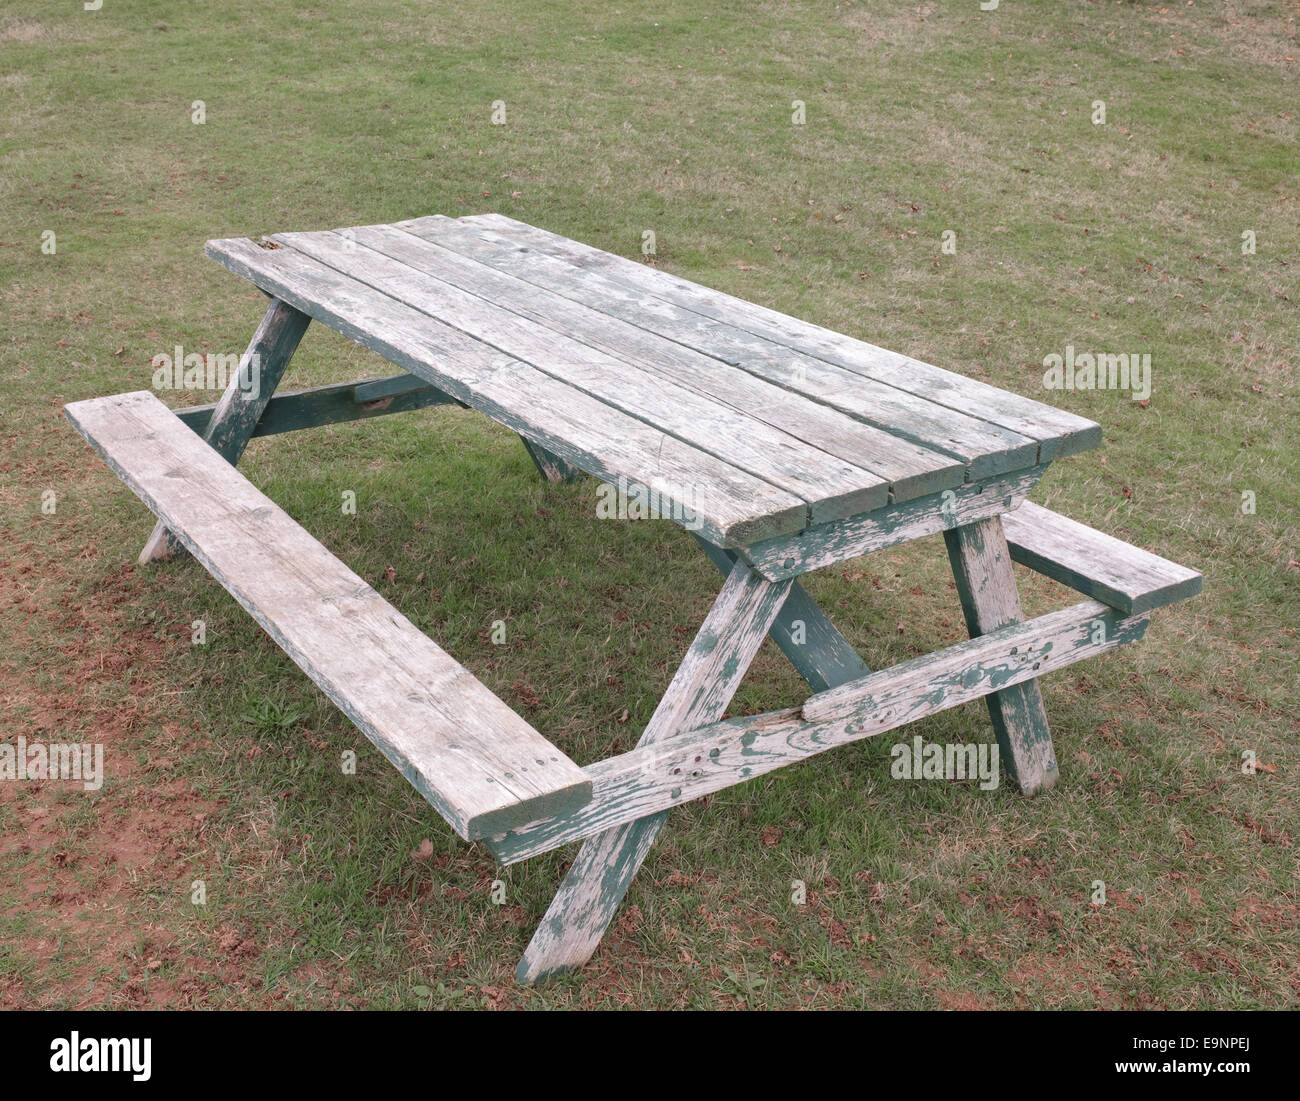 Weathered picnic table on beaten down grass Stock Photo - Alamy